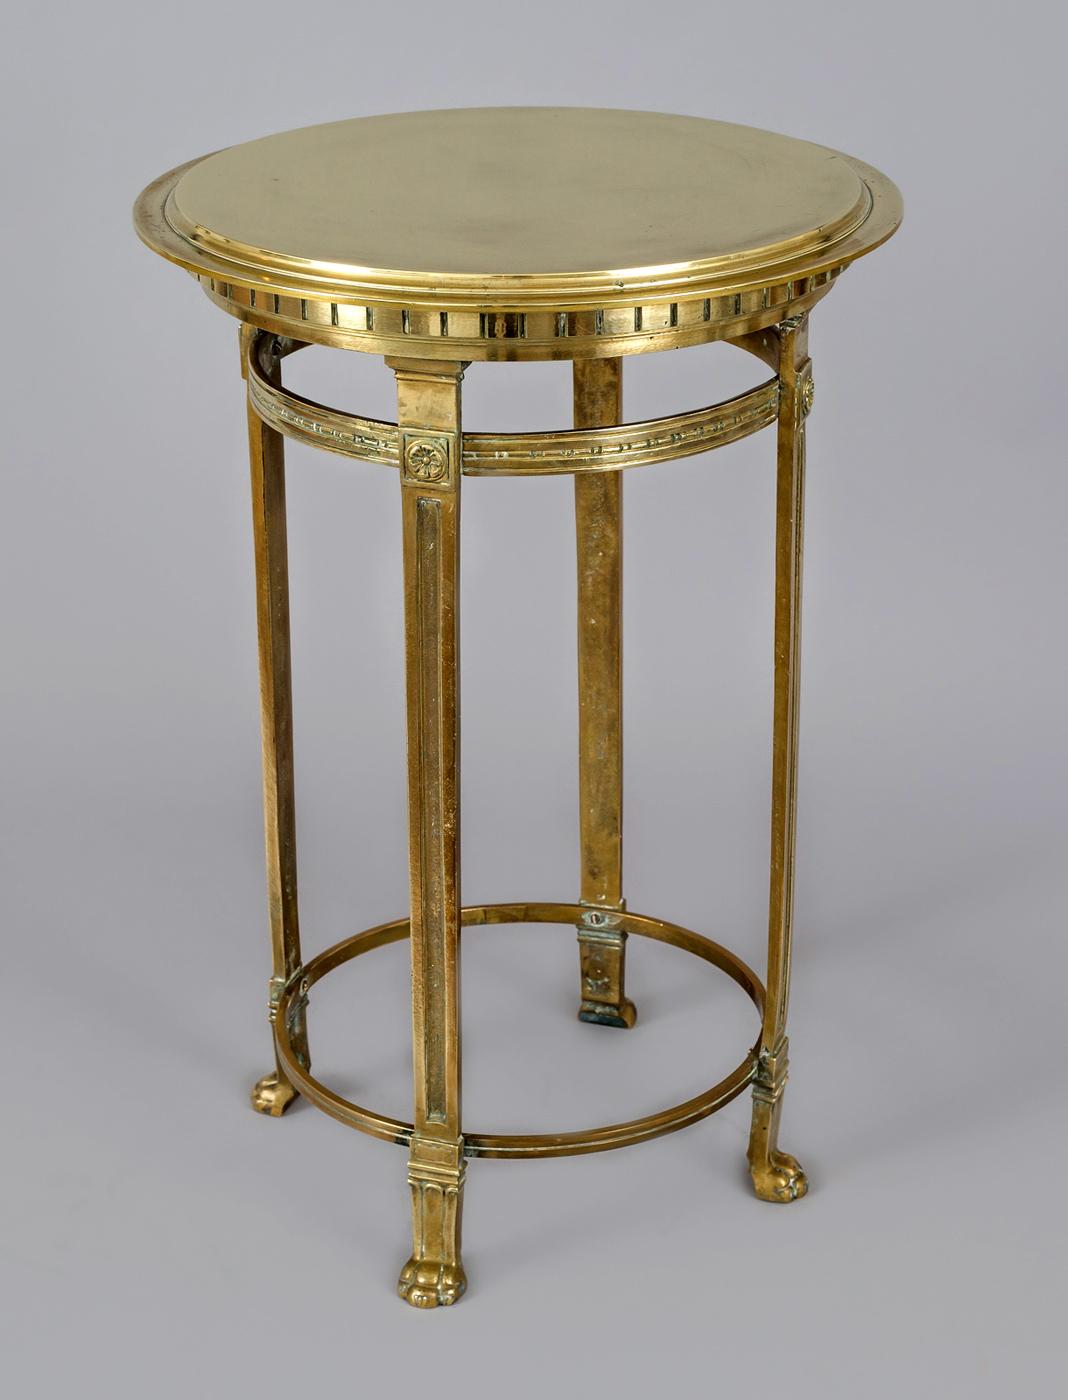 Early 20th Century French Bronze Round Gueridon Table